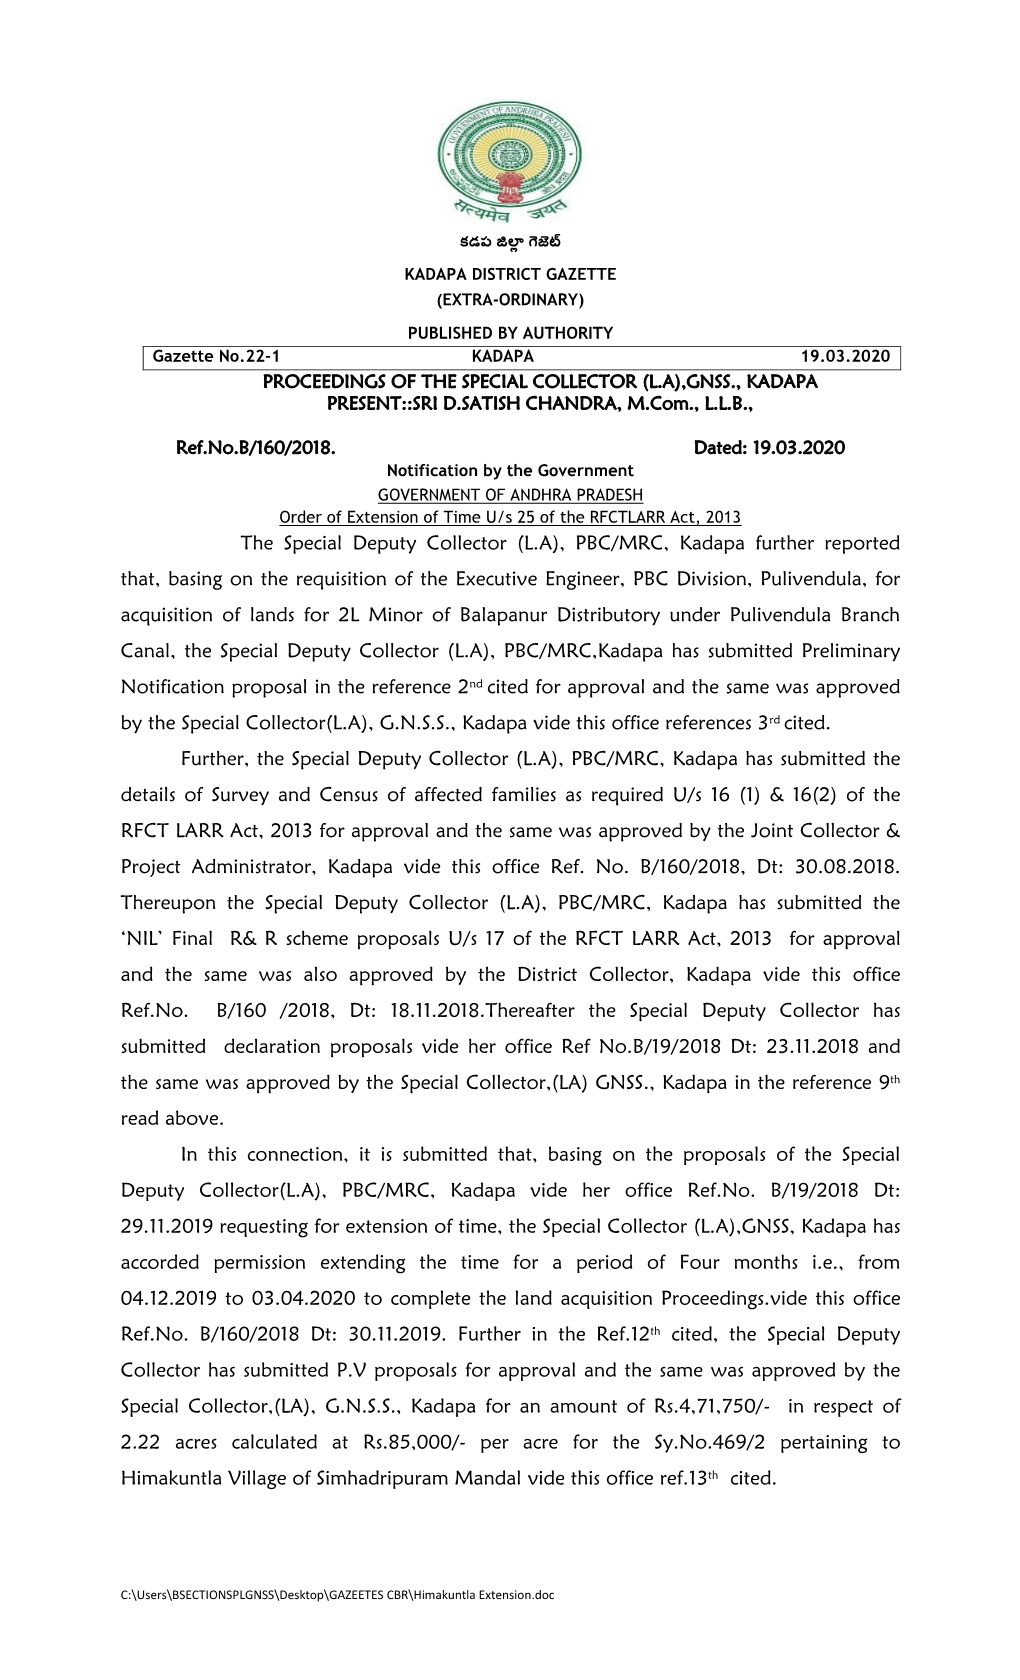 The Special Deputy Collector (L.A), PBC/MRC, Kadapa Further Reported